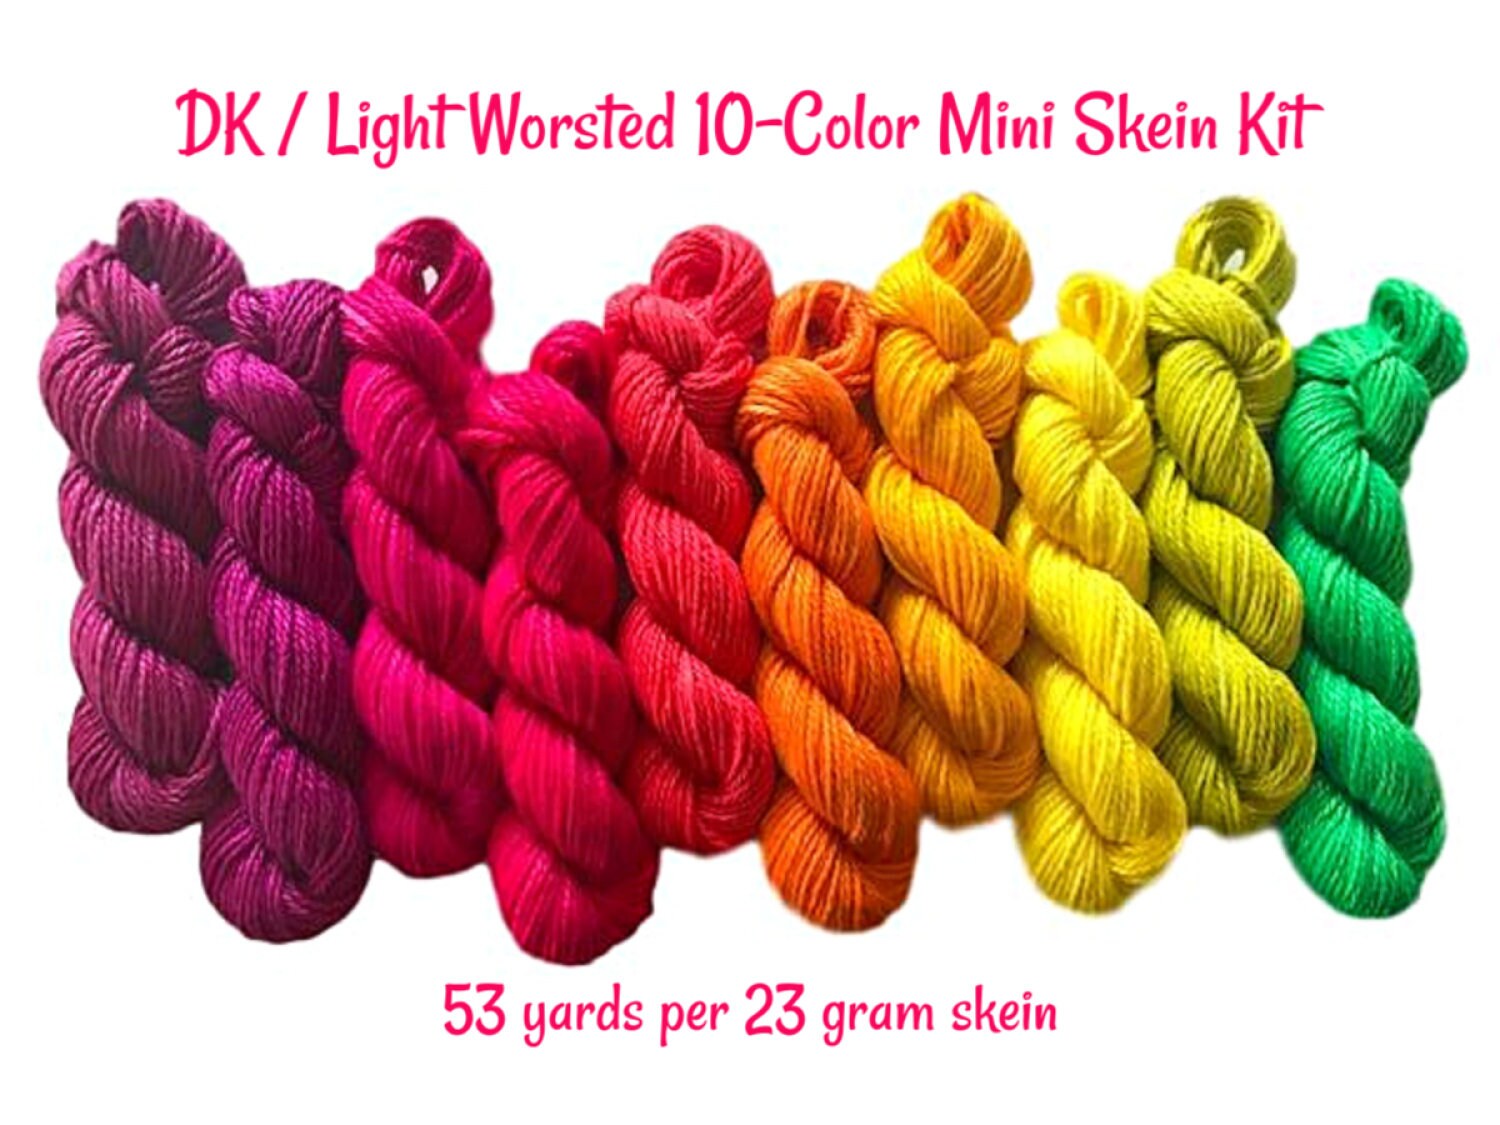 Vegan Yarn Mini Skein Kit - Hand Dyed DK / Light Worsted Bamboo Cotton - (10) 53 yd Skeins in Bright Semi Solids - 3 Ply Ultra Soft Yarn